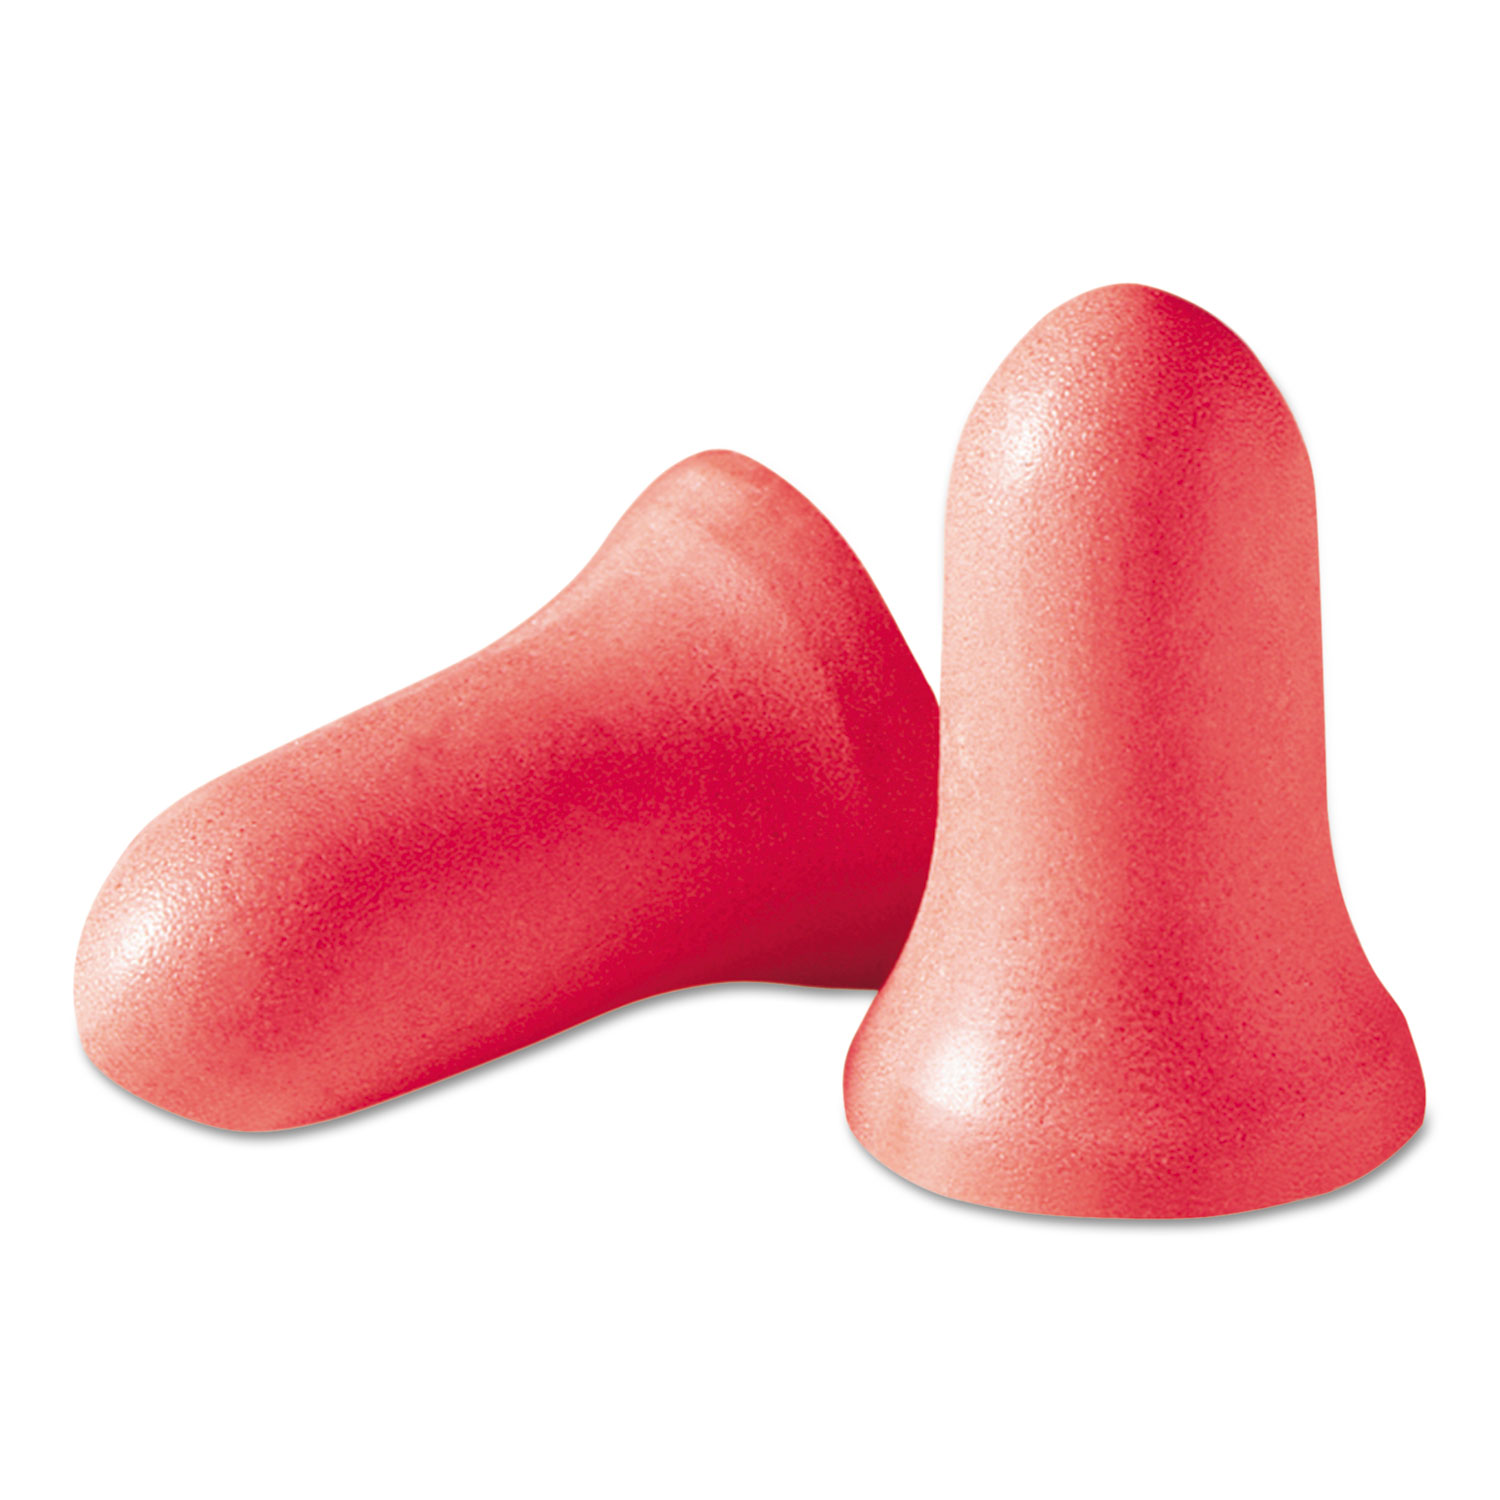  Howard Leight by Honeywell MAX-1 MAX-1 Single-Use Earplugs, Cordless, 33NRR, Coral, 200 Pairs (HOWMAX1) 